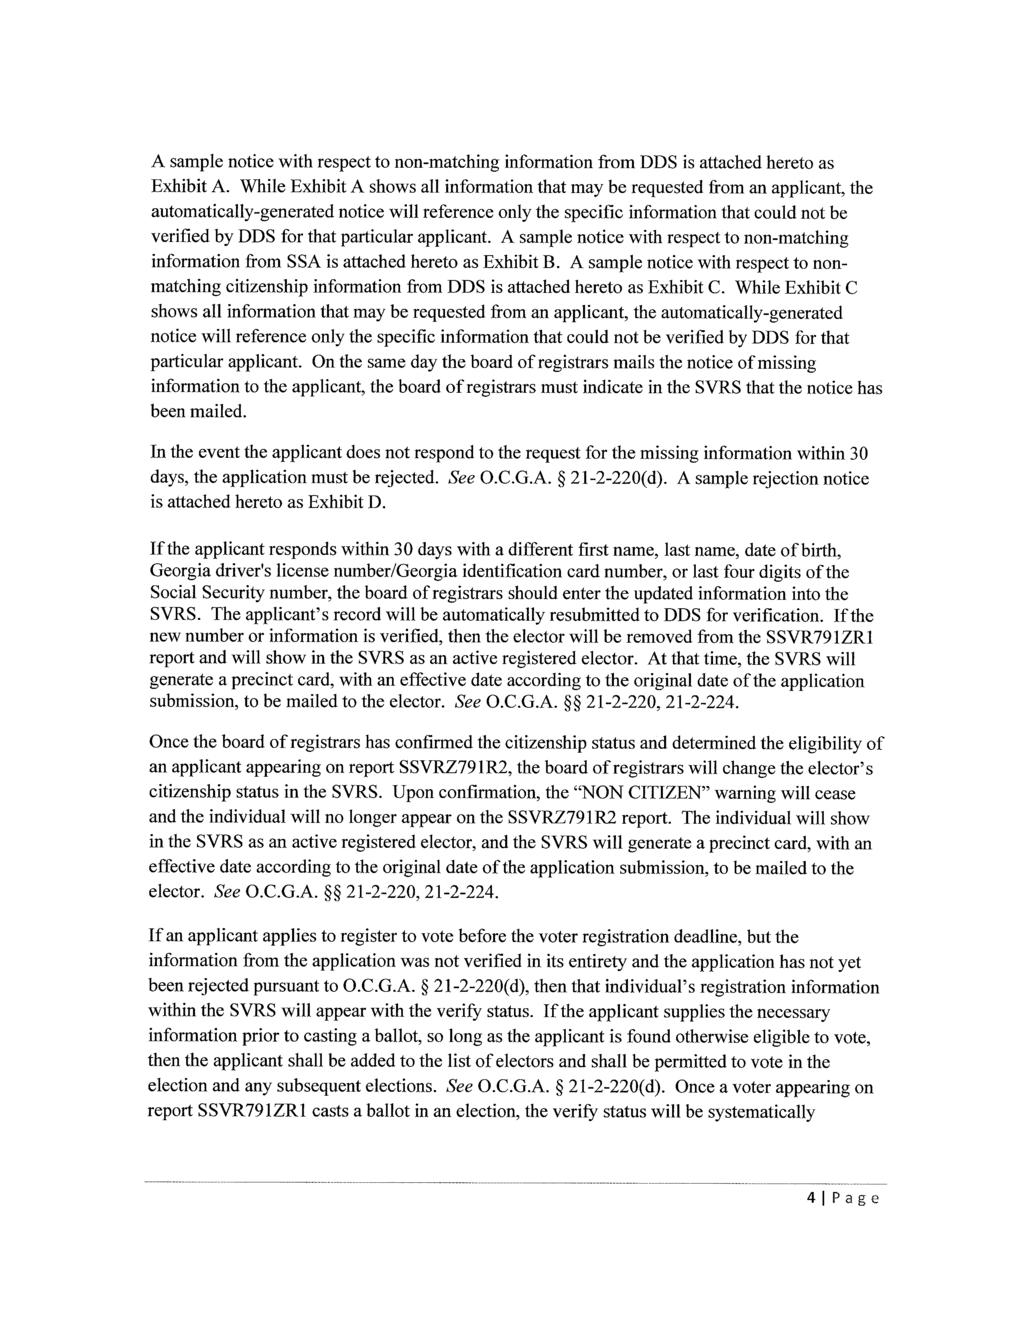 Case 1:10-cv-01062-ESH Document 1-6 Filed 06/22/10 Page 4 of 18 A sample notice with respect to non-matching information from DDS is attached hereto as Exhibit A.